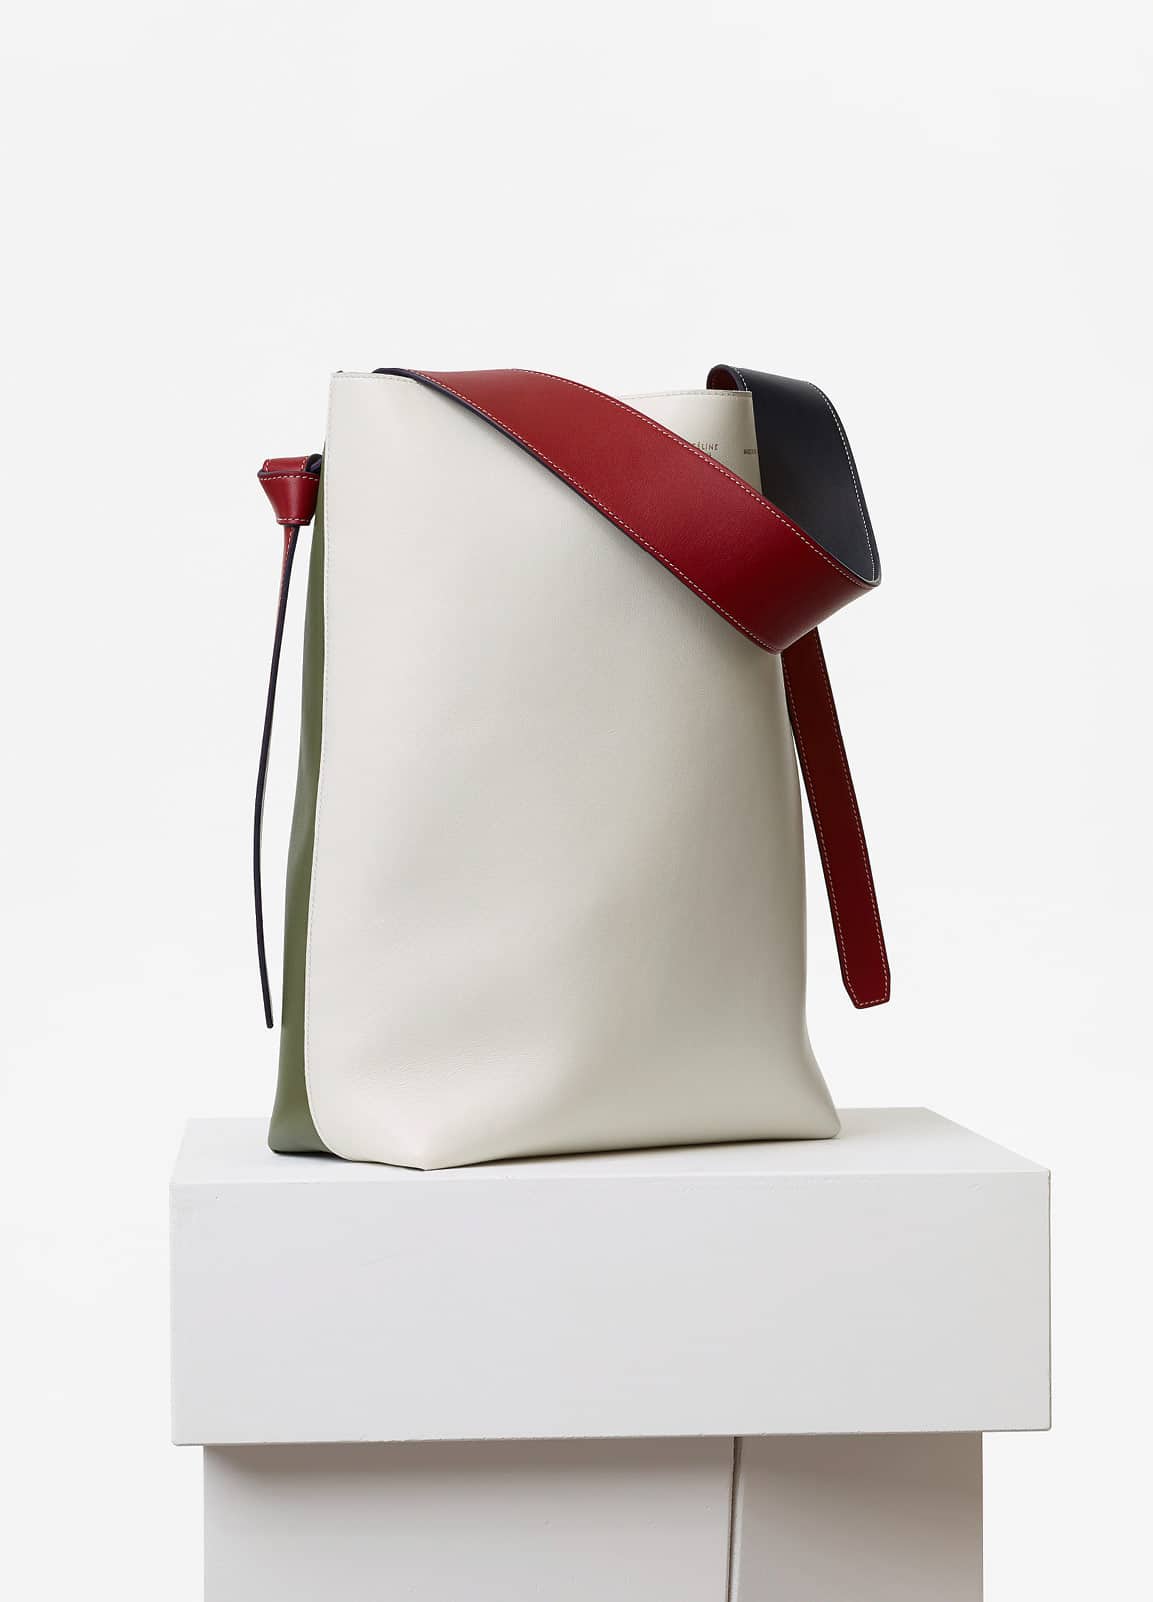 Celine Resort 2016 Bag Collection Featuring New Saddle Bags ...  